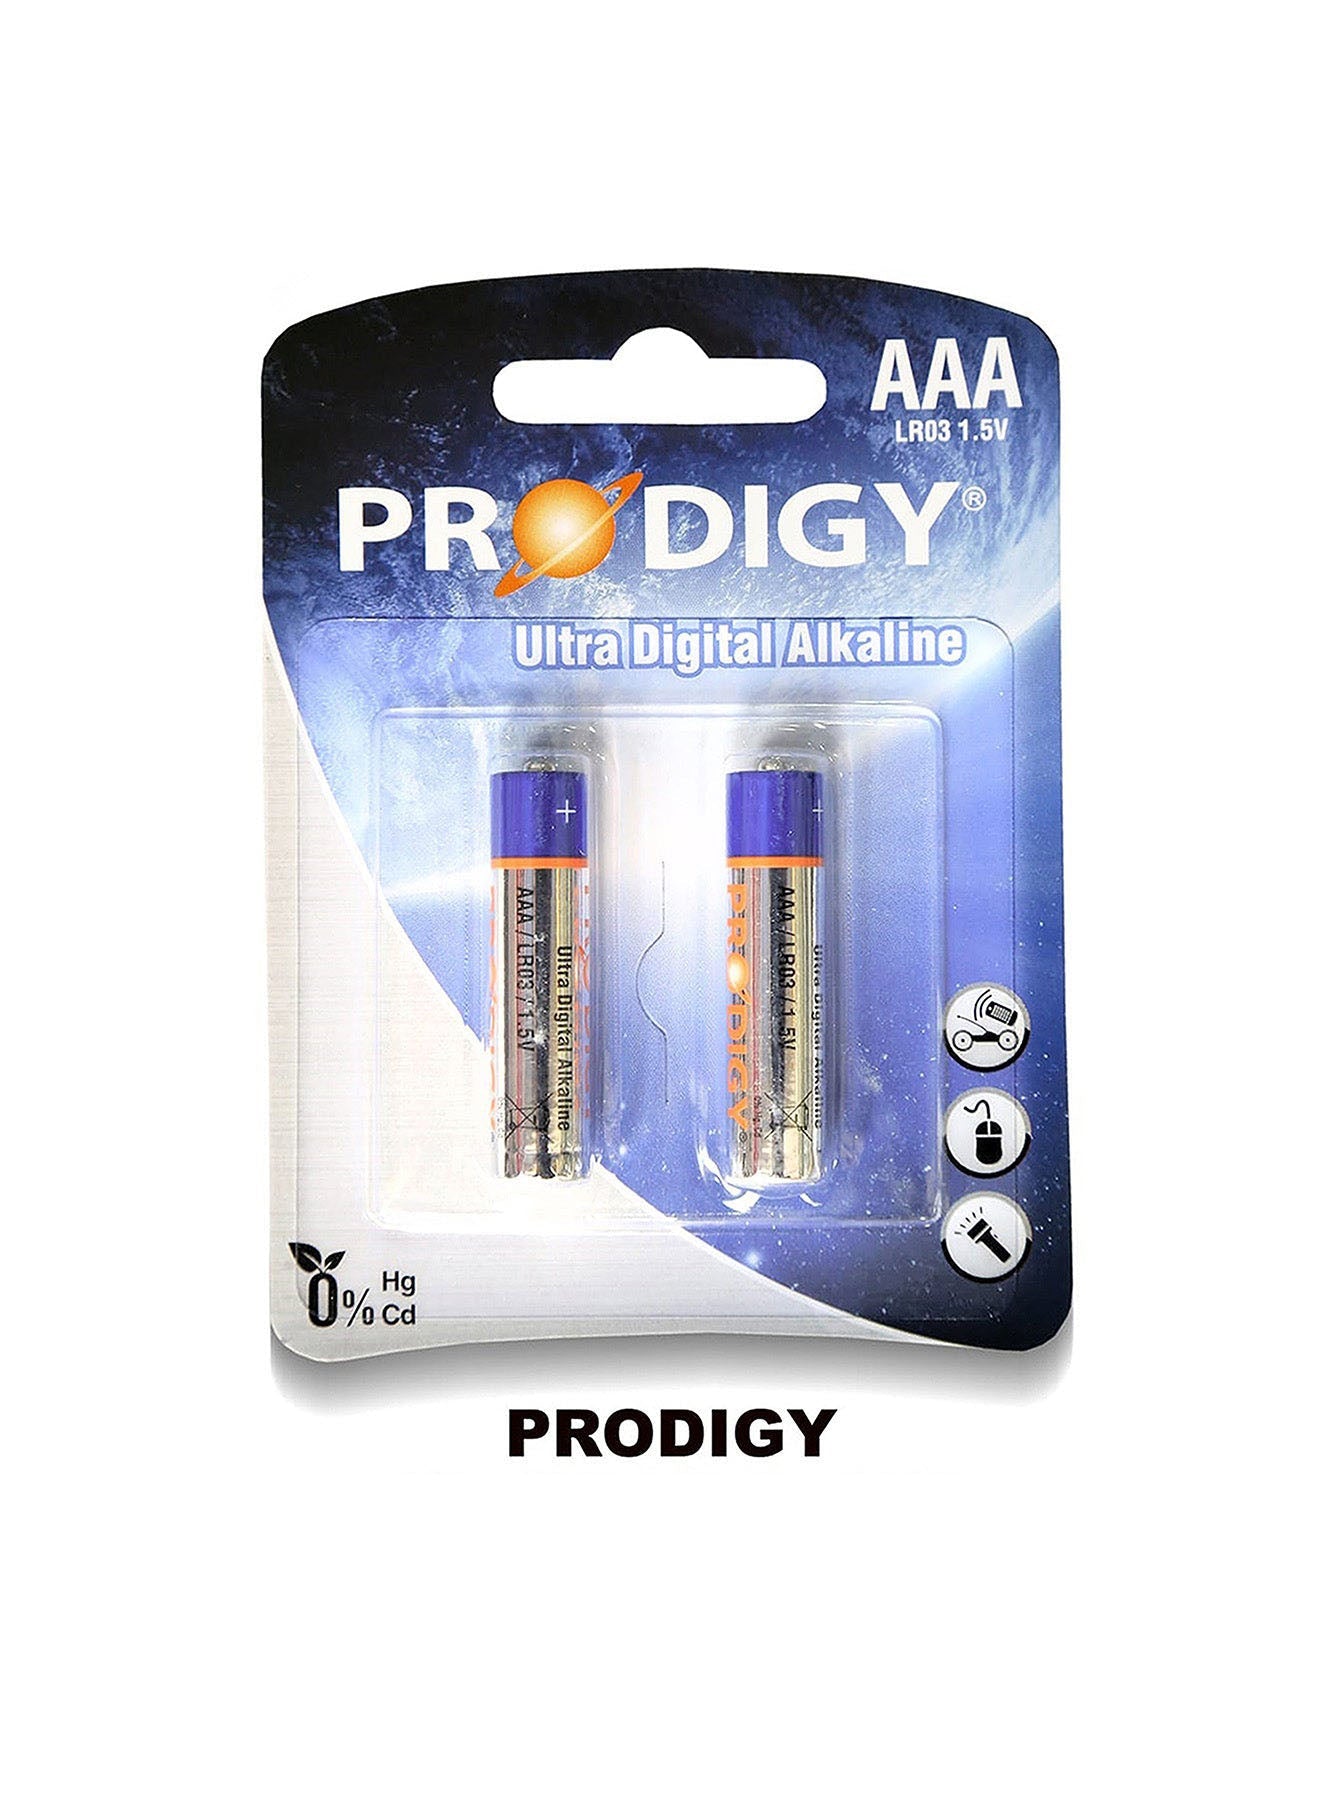 Prodigy Alkaline LR03UD AAA2 Value Pack of 4 